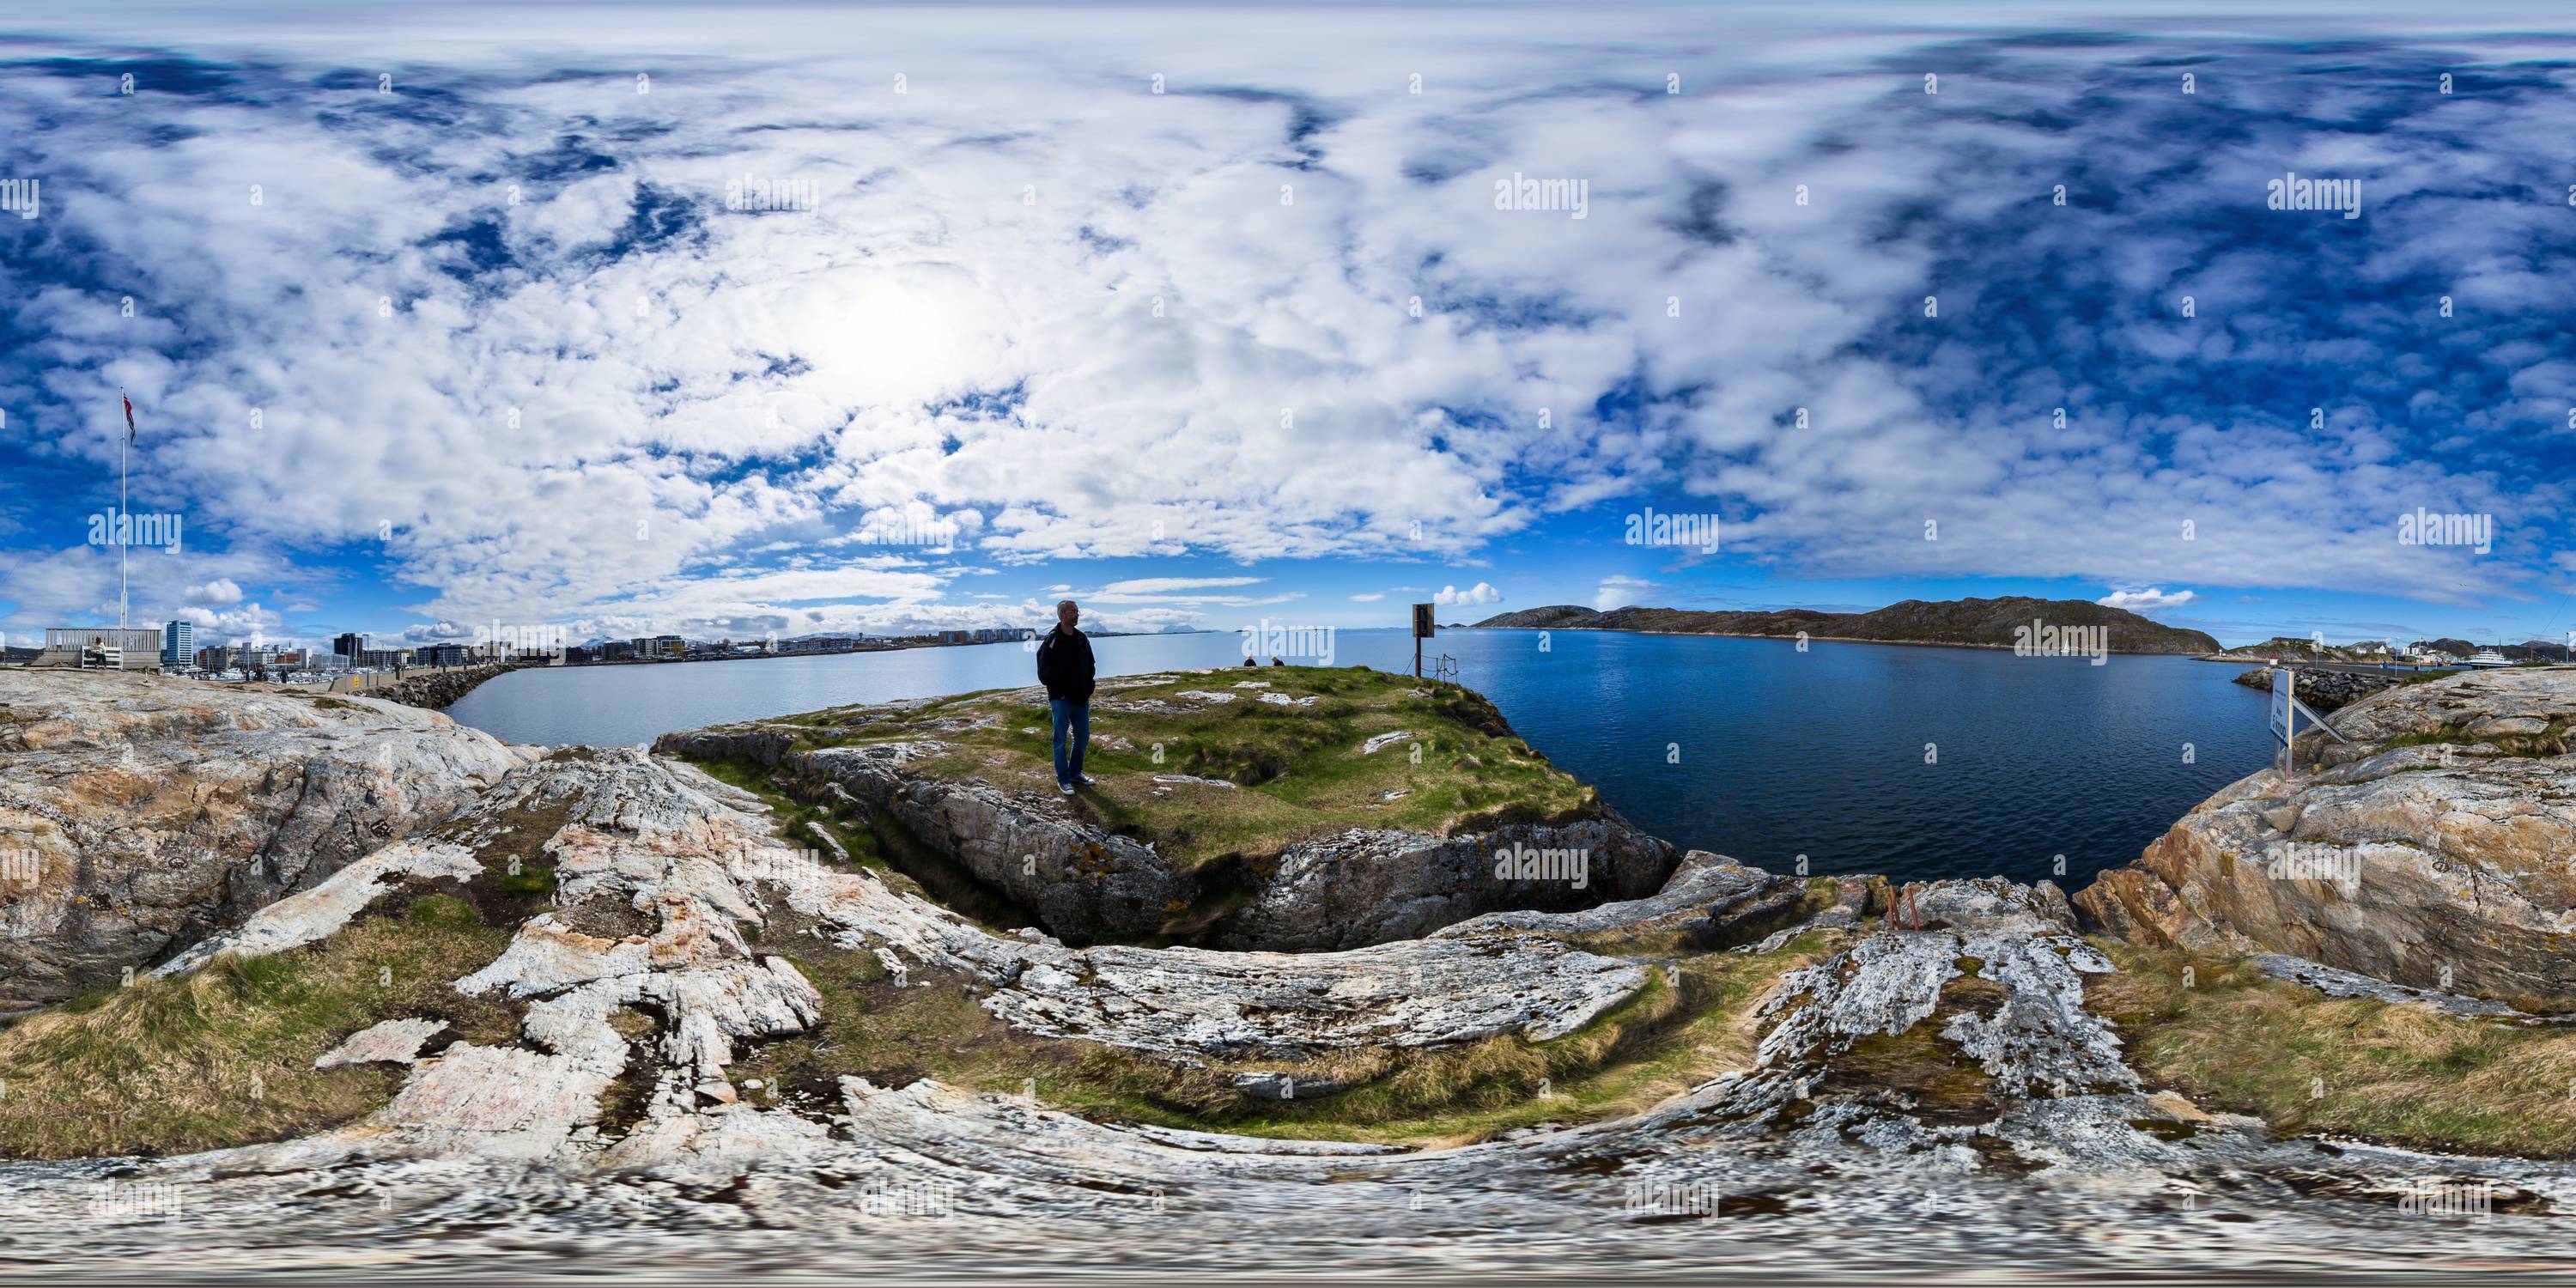 360 degree panoramic view of Take a look around, Bodo, Norway